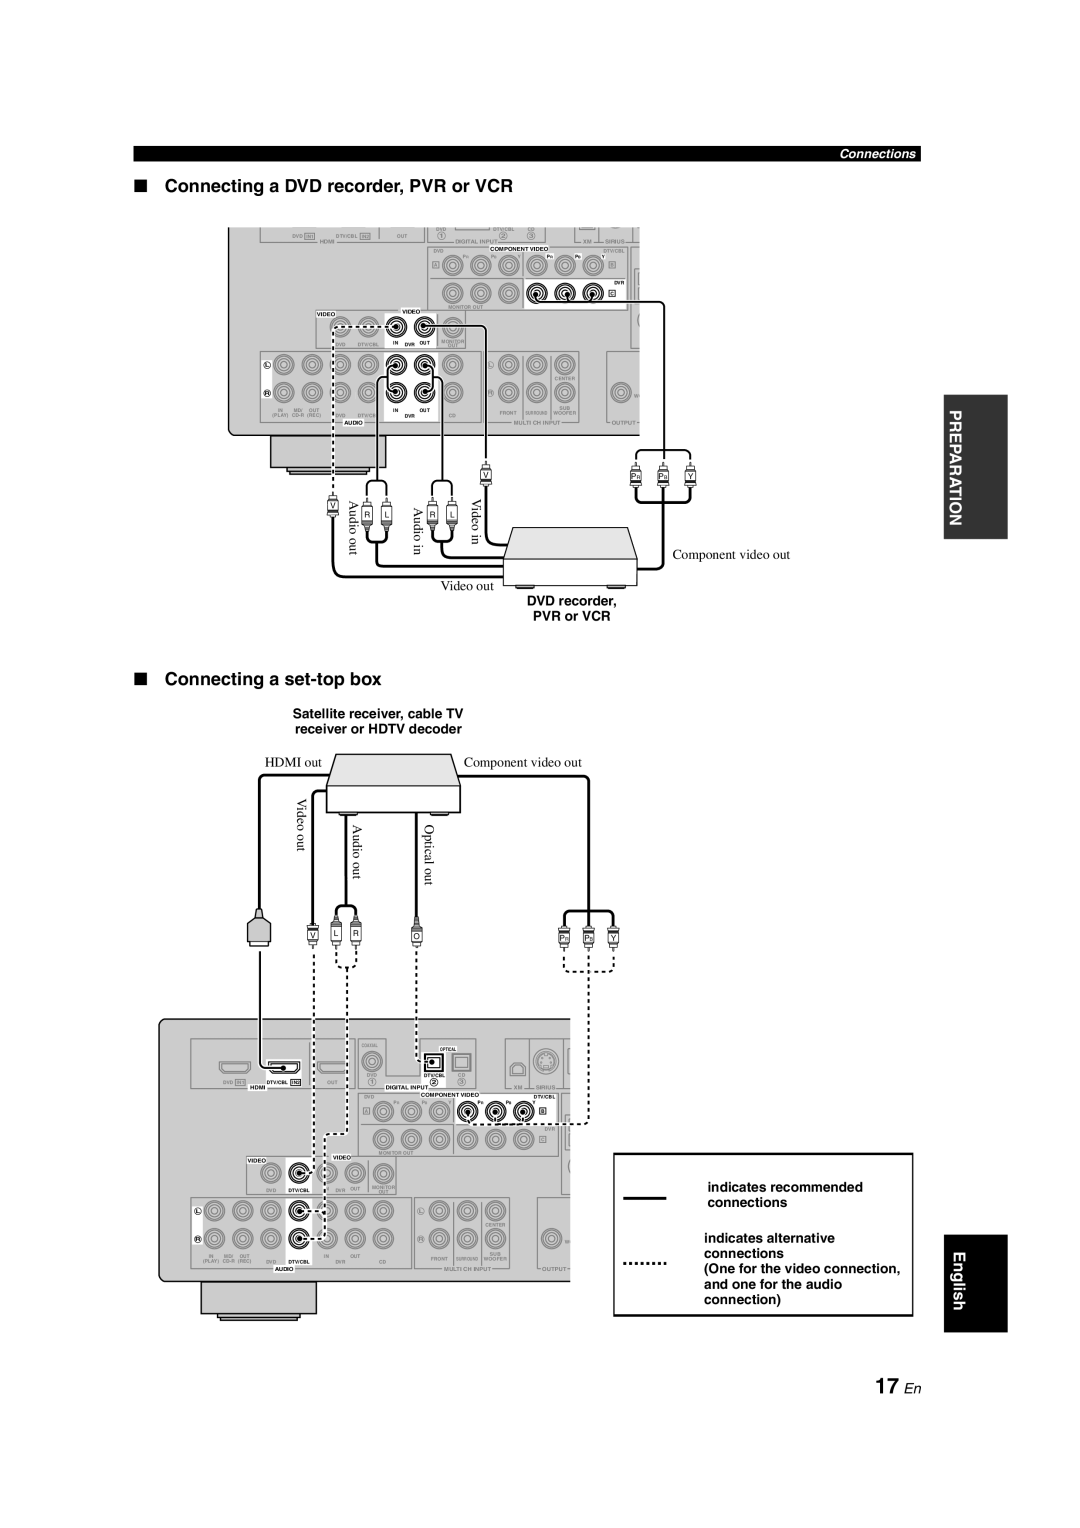 Yamaha HTR-6140 owner manual 17 En, Connecting a DVD recorder, PVR or VCR, Connecting a set-topbox, Connections 